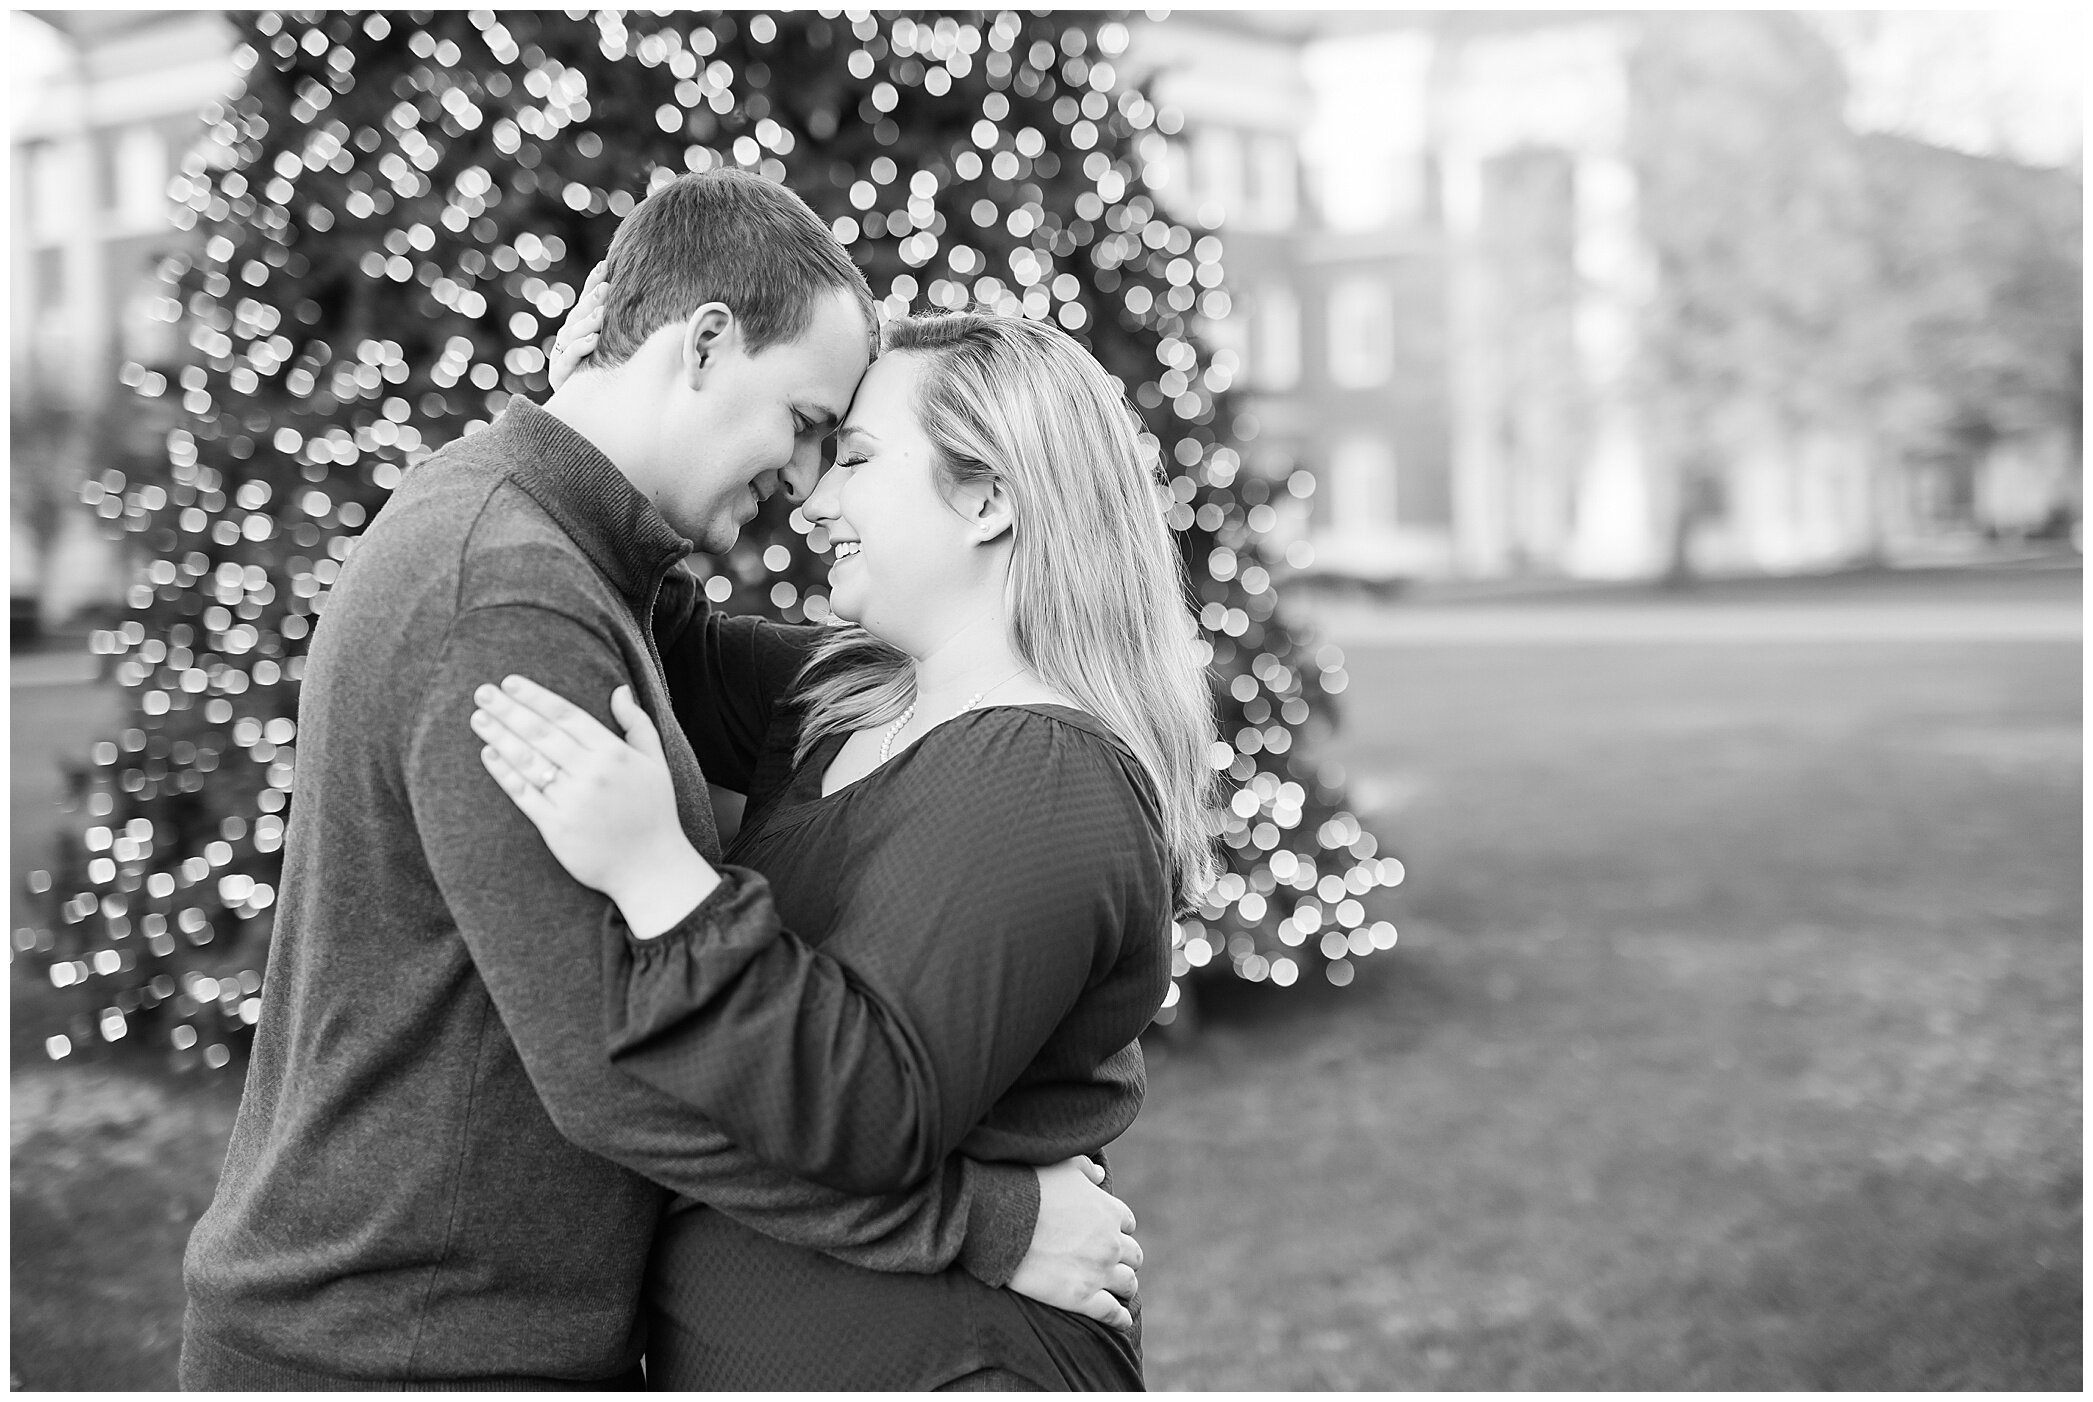 engaged couple stands nose to nose by Christmas tree at Christopher Newport University